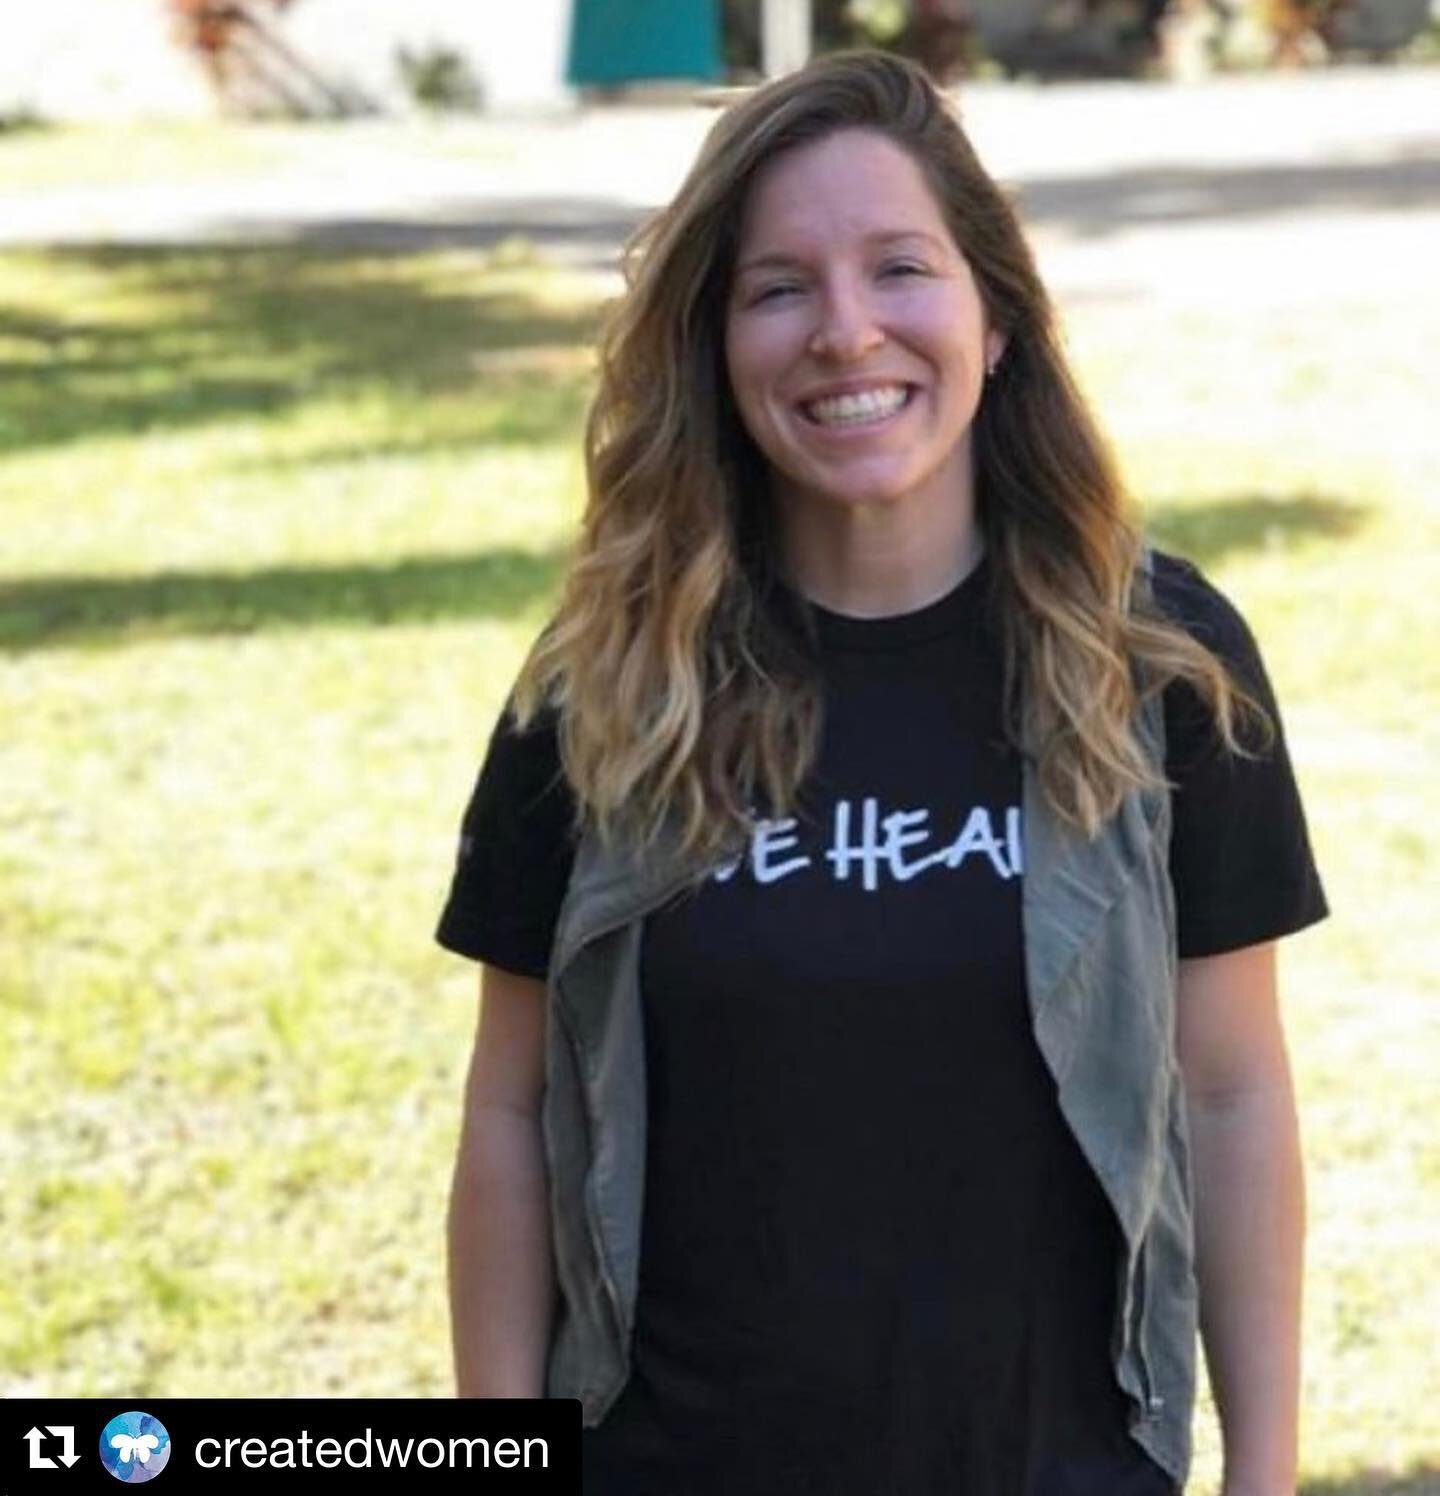 This is Jillian Penhale, from @createdwomen - an incredible organization in Tampa that provides critical and innovative supports/resources including emergency housing, support groups, a resource drop-in center and more to women caught in the life of 